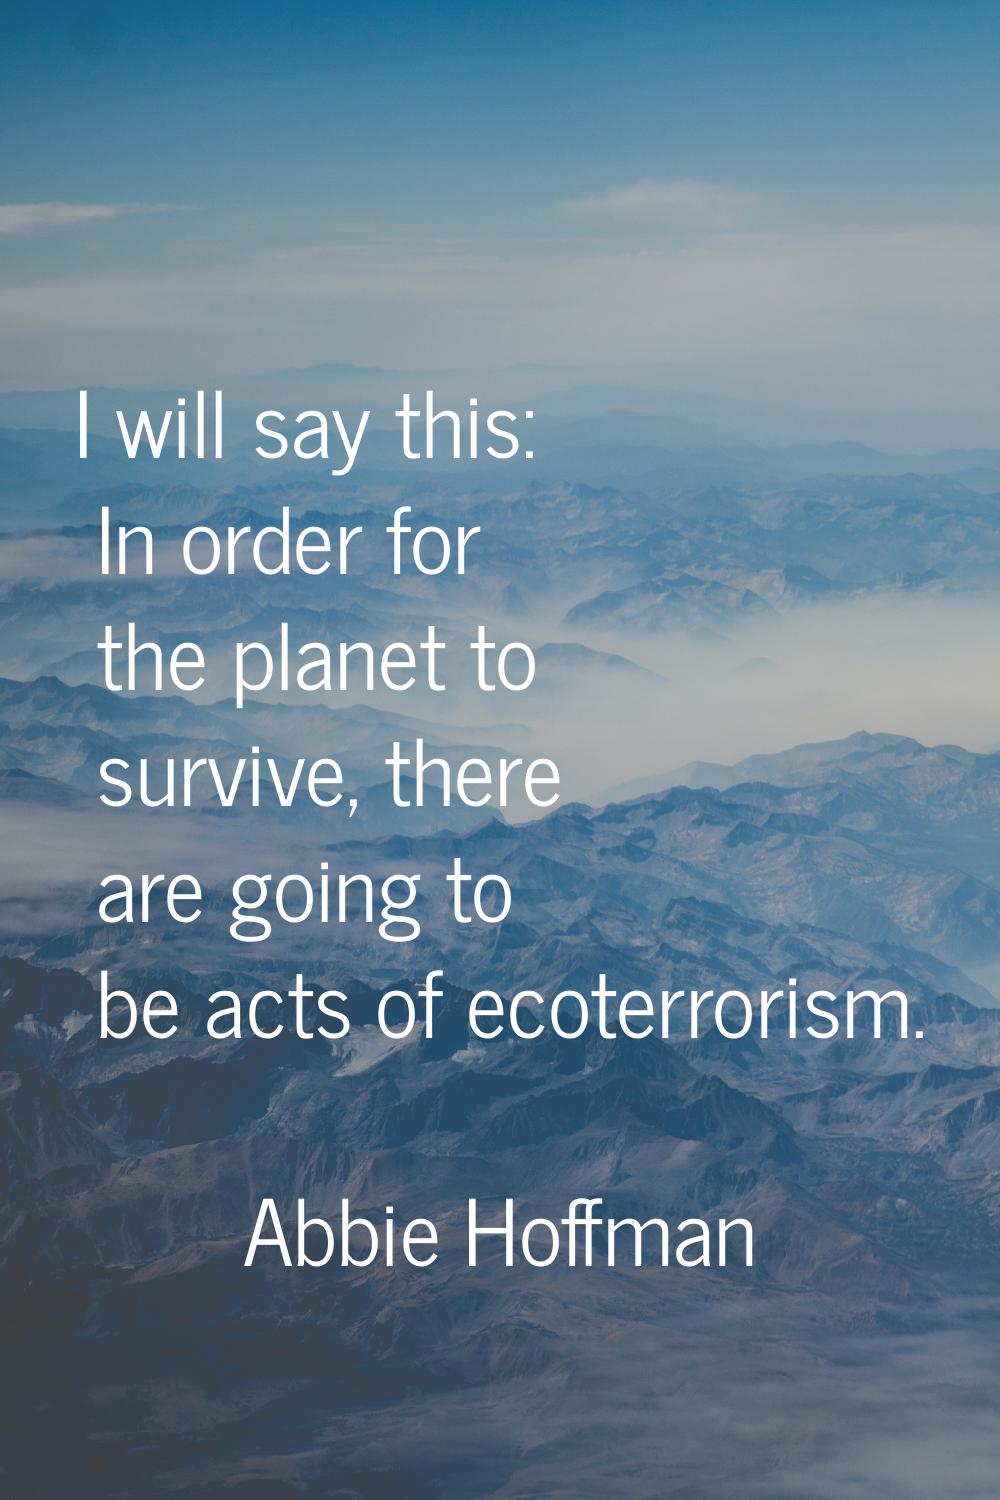 I will say this: In order for the planet to survive, there are going to be acts of ecoterrorism.